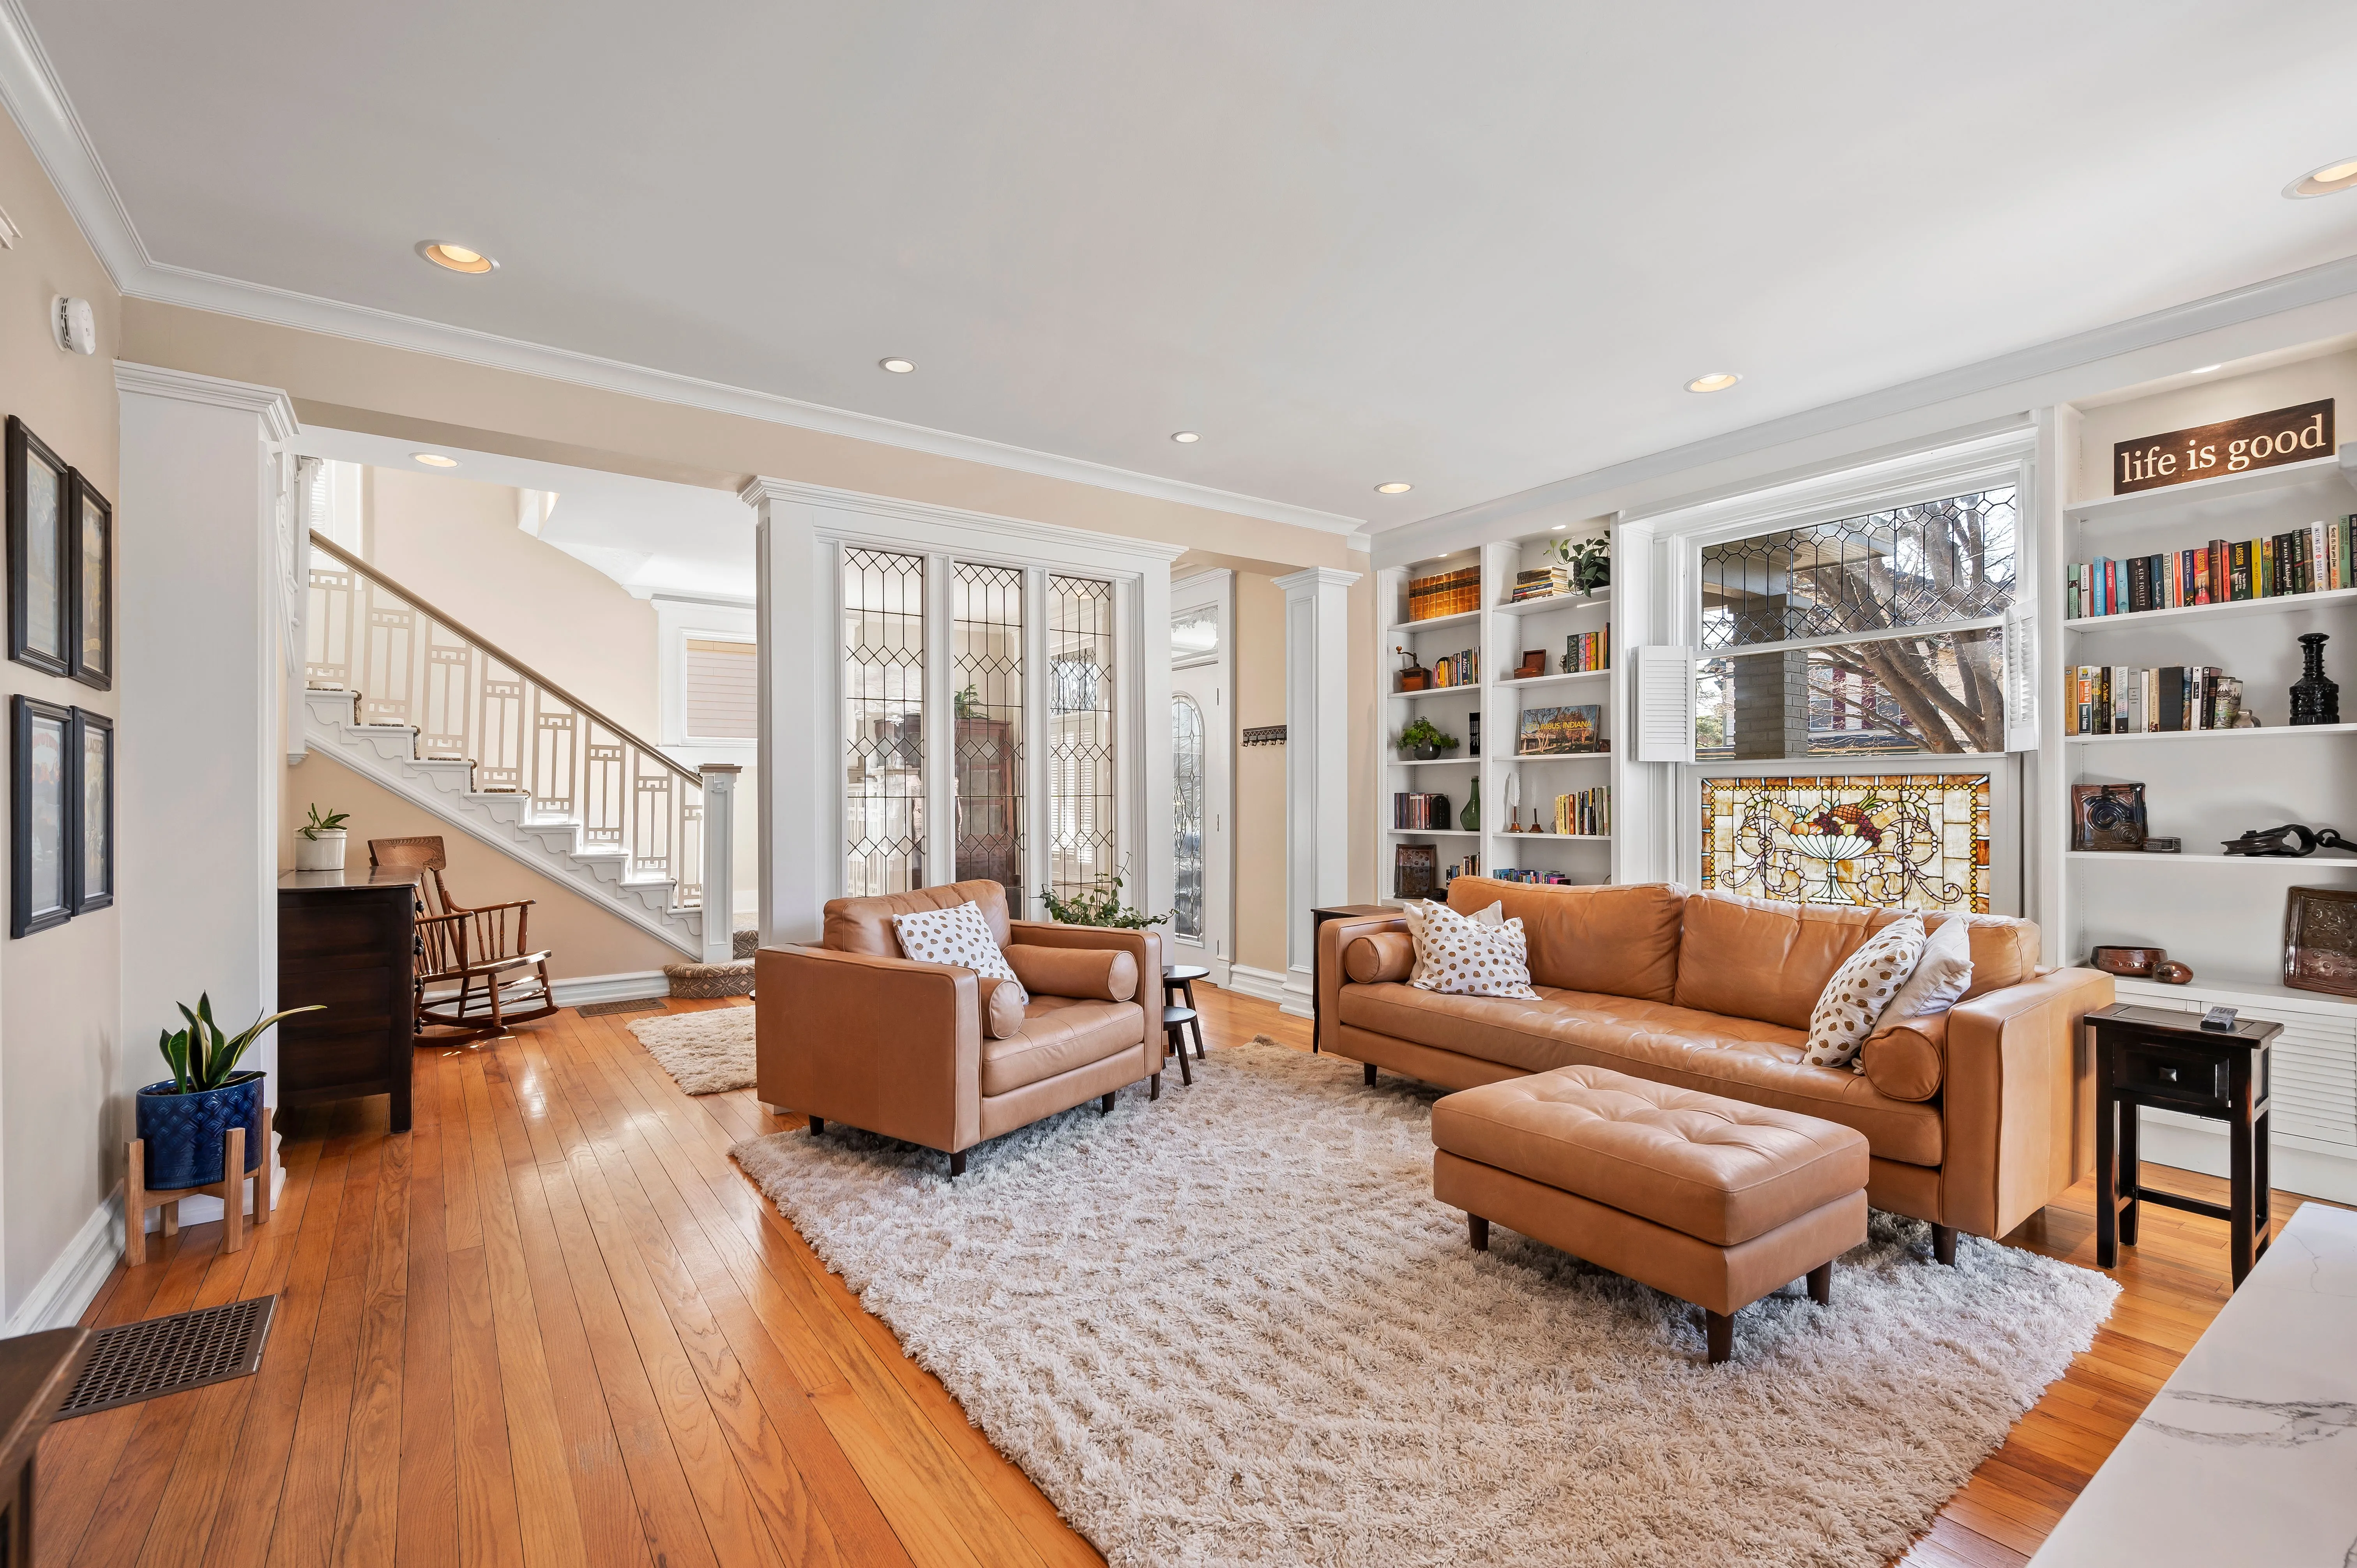 Bright and spacious living room interior with tan sofas, a large area rug, hardwood floors, built-in bookshelves, and staircase leading to the upper level.